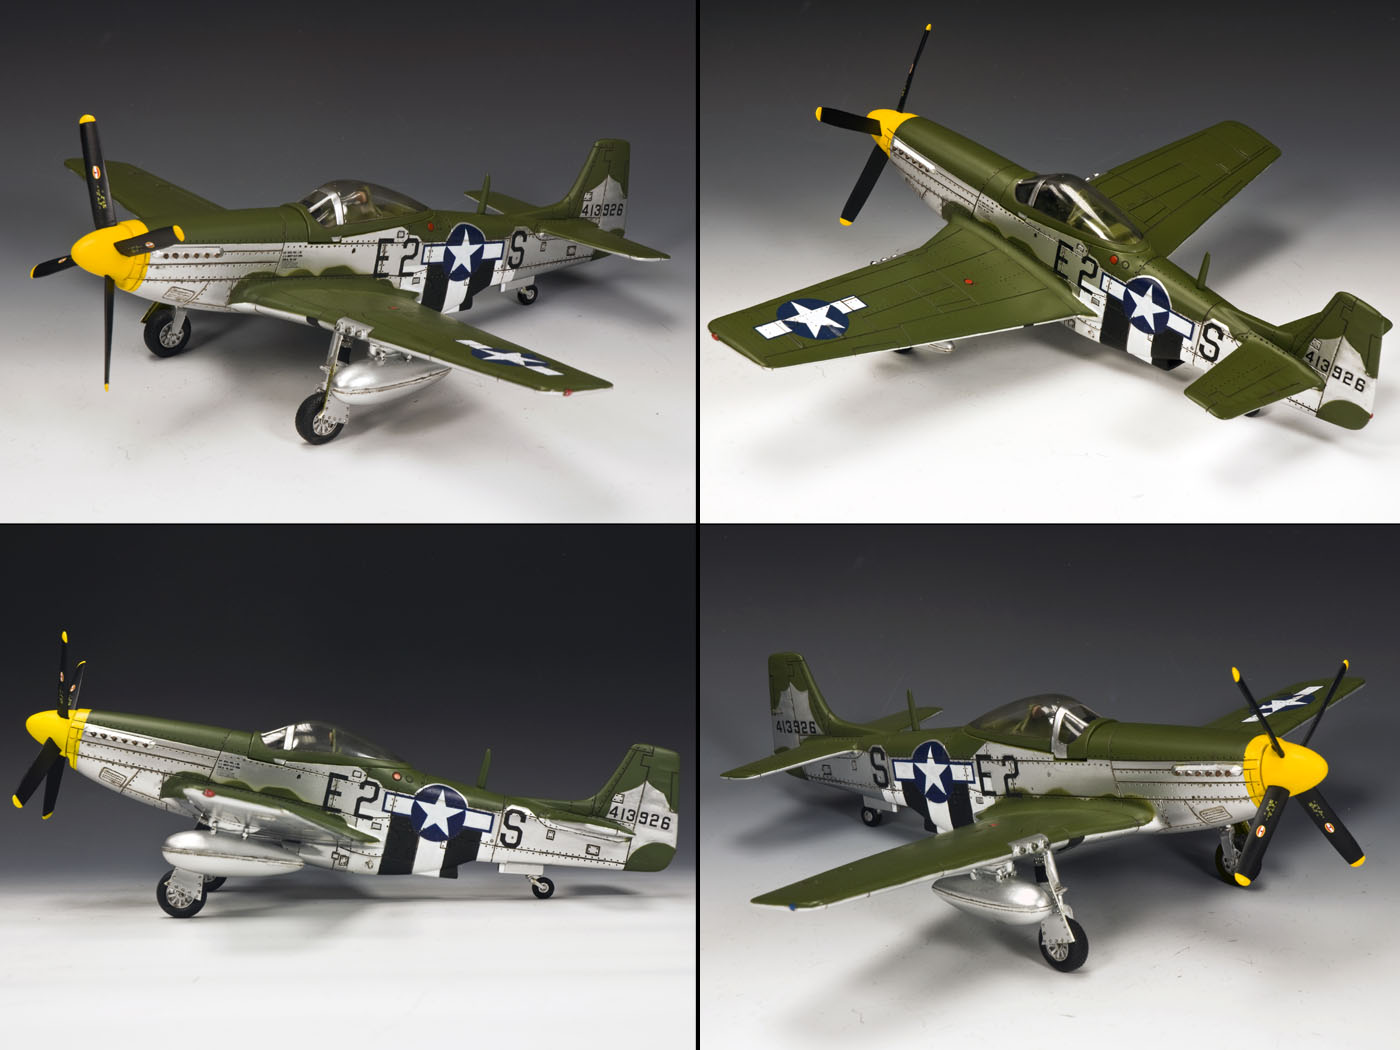 P51D-Day Mustang